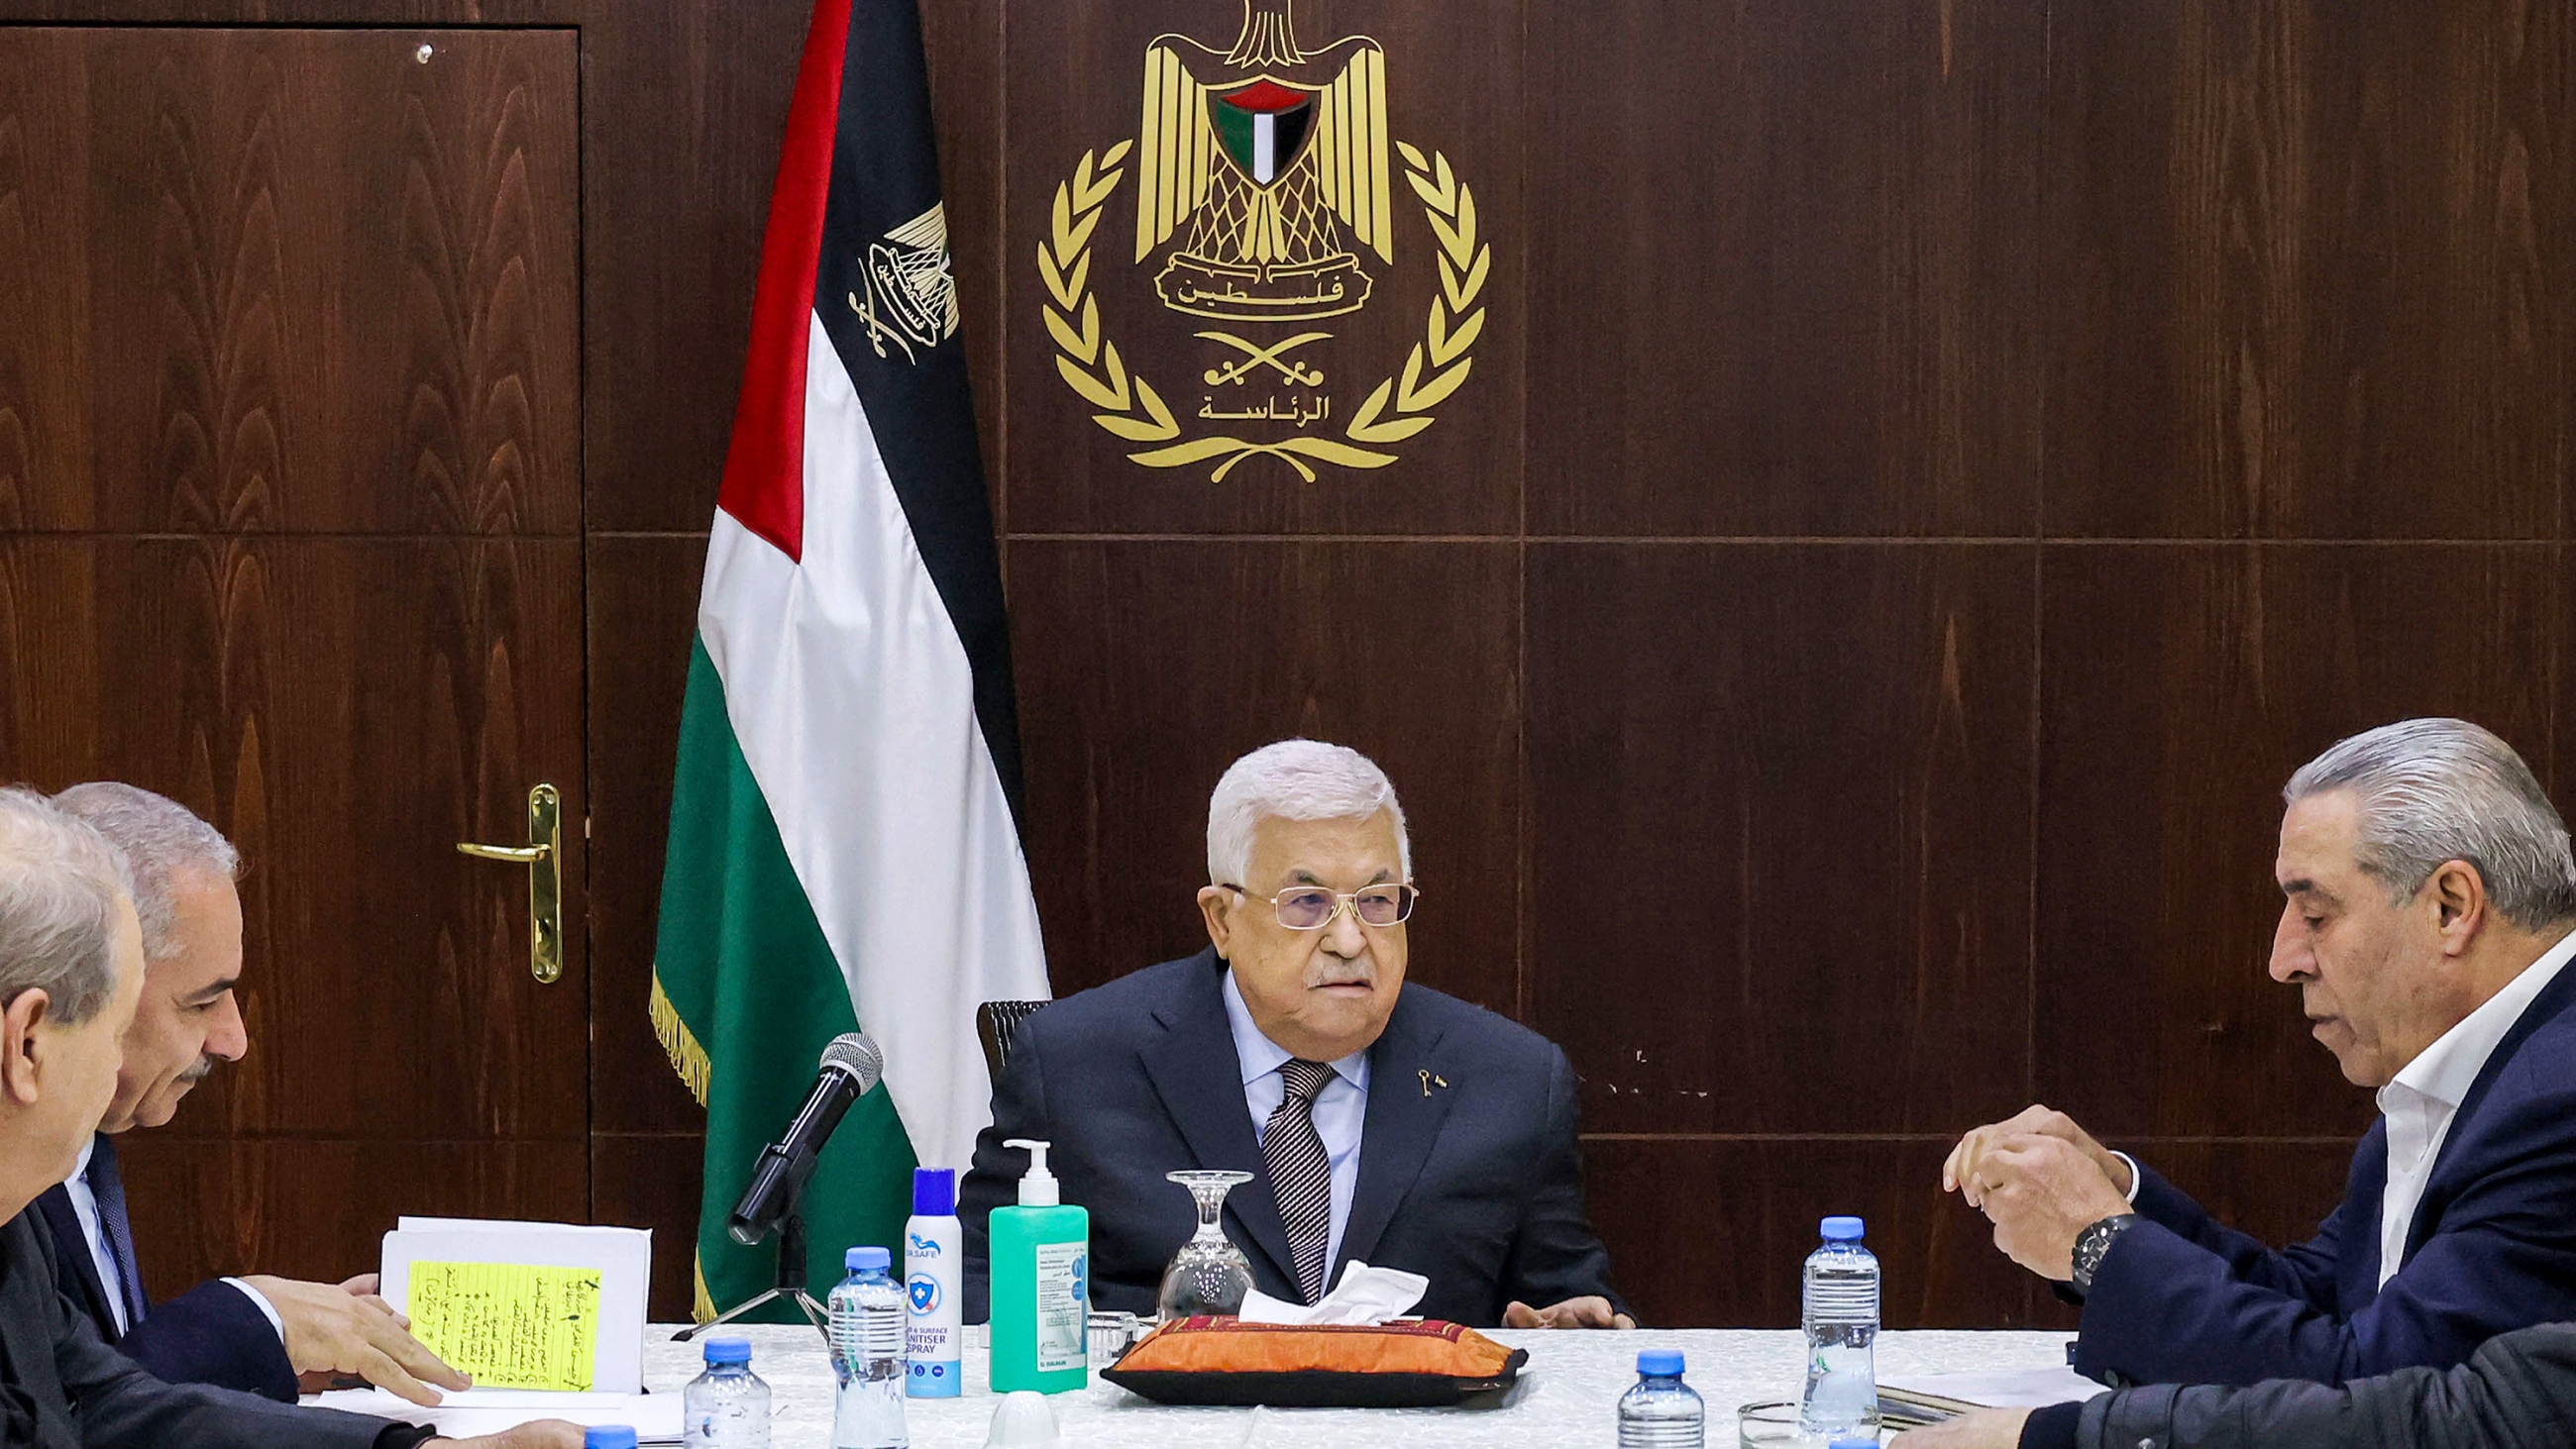 Palestinian President Mahmud Abbas chairs a meeting of the executive committee of the Palestine Liberation Organisation (PLO) in the city of Ramallah in the occupied West Bank on 25 December 2023 (Thaer Ghanaim/AFP)